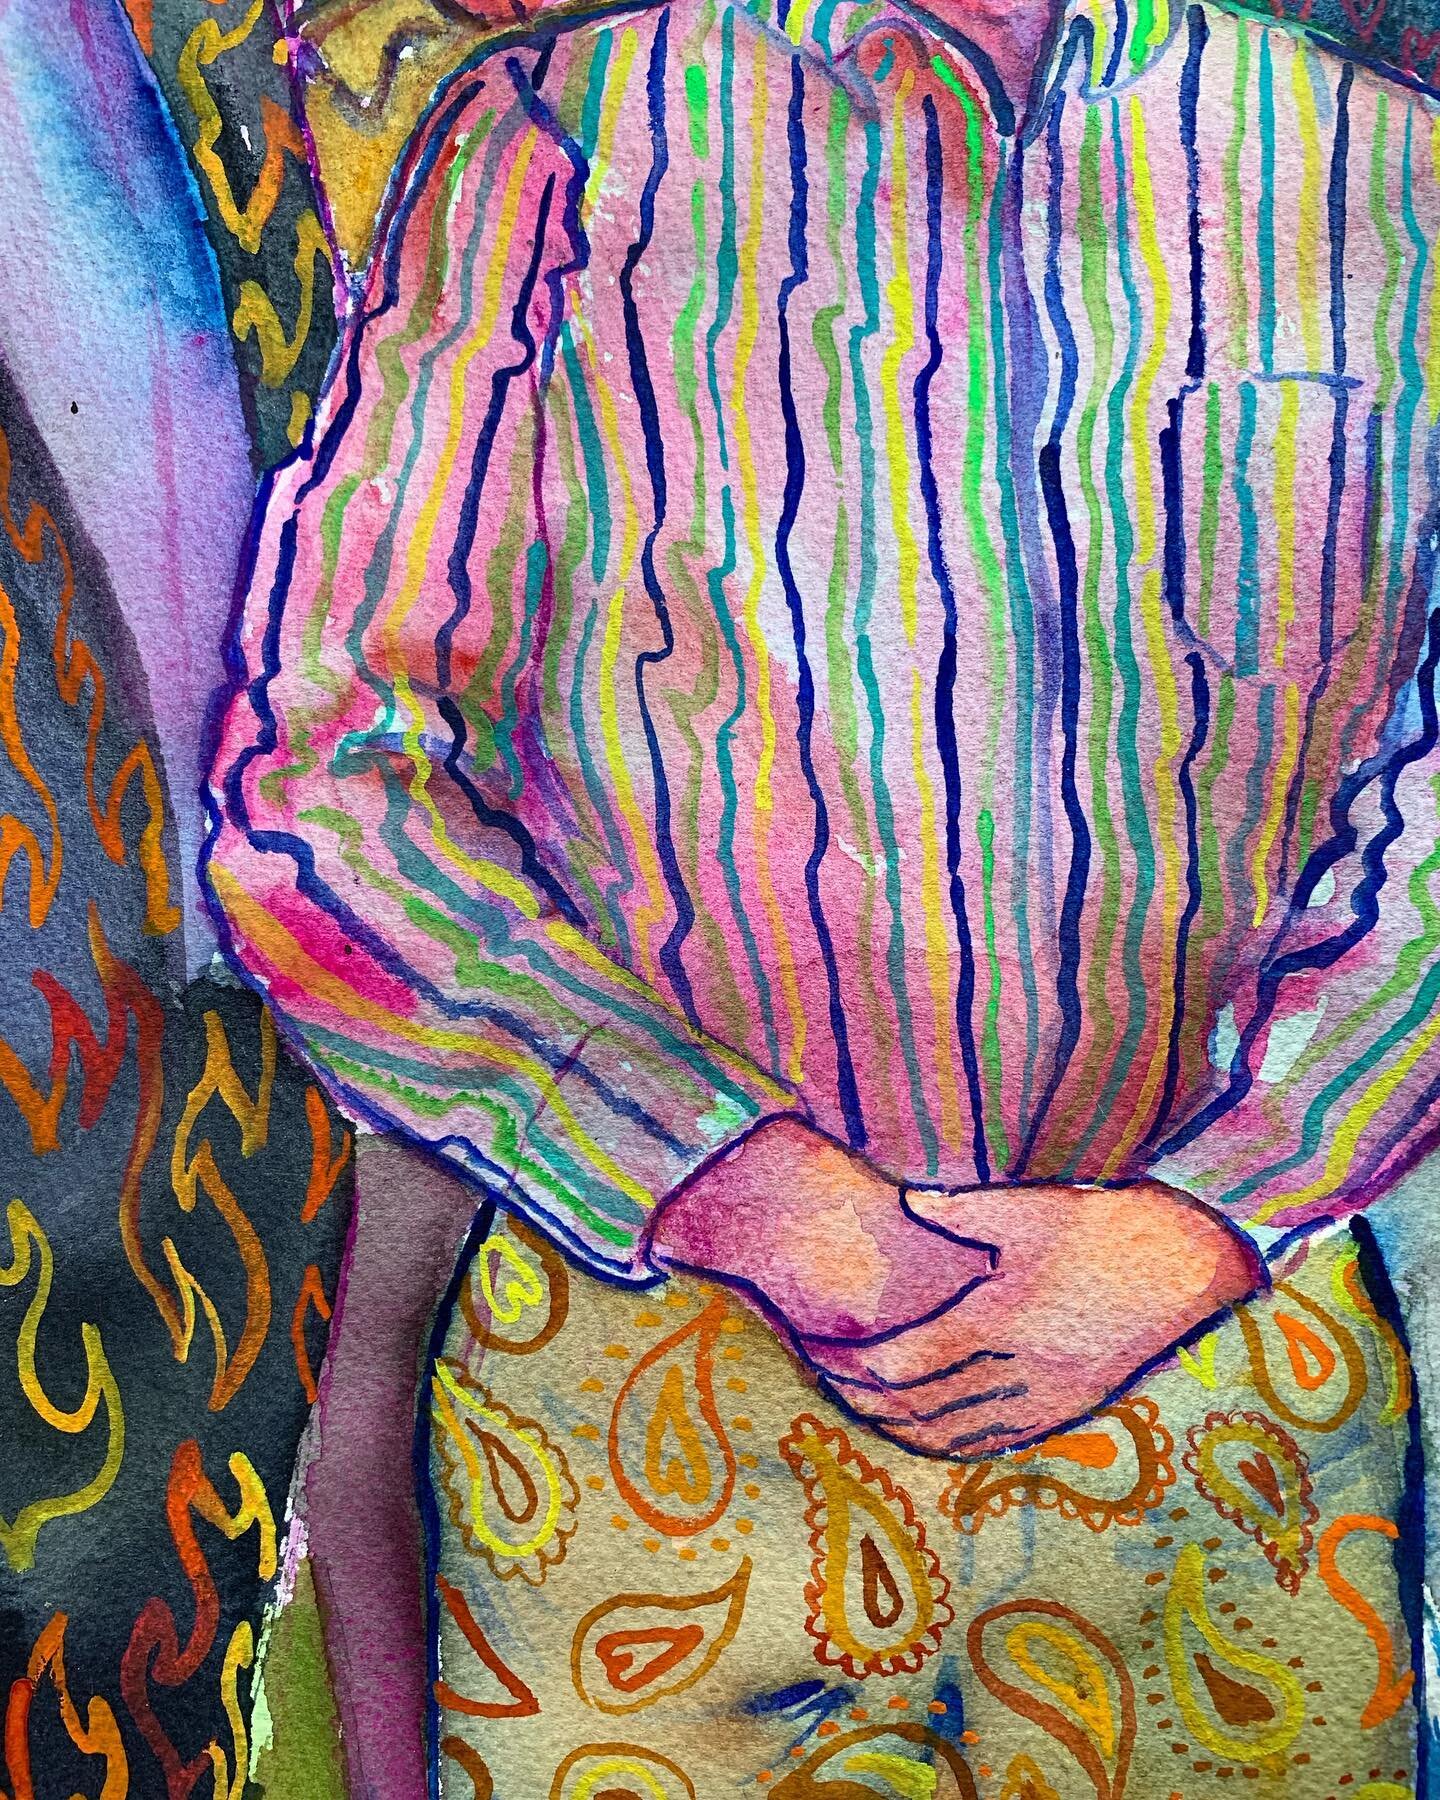 Closeup of a #wip 

#wipwednesday #wipart #watercolor #watercolorpainting #watercolorart #watercolour #queerart #queerartist #commission #commissionart #commissionartist #pattern #slcart #slcartist